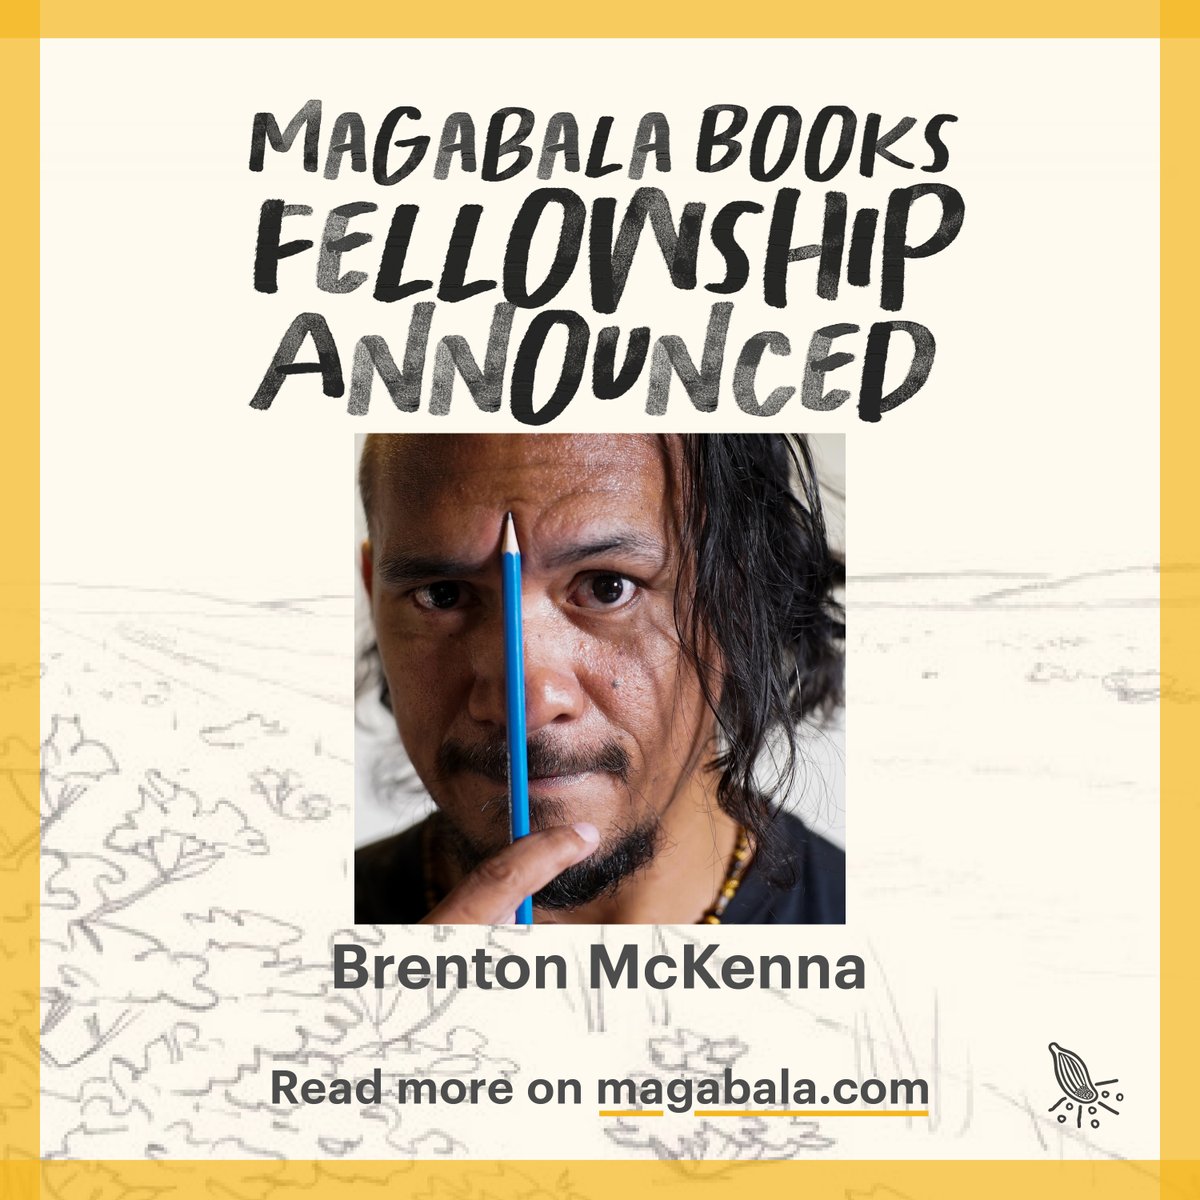 Congratulations to the 2023 mid-career Fellowship recipient Brenton E. McKenna. Magabala acknowledges the support of Serp Hills Foundation in awarding the 2023 Fellowship. Read more: magabala.com/blogs/news/mag… #MagabalaBooks